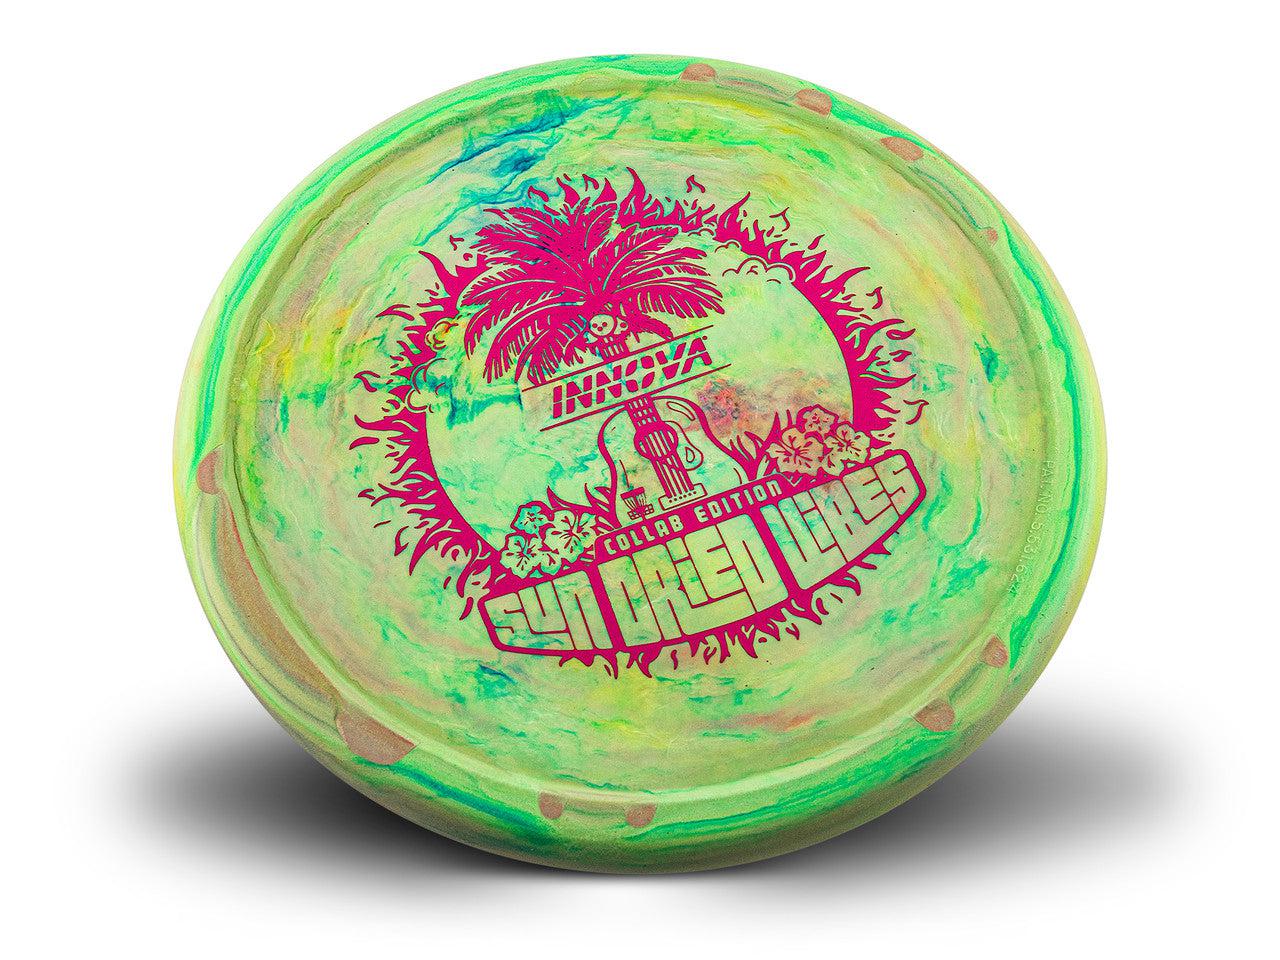 Innova Galactic Test Material Pig with Sun Dried Vibes Collab Edition Stamp